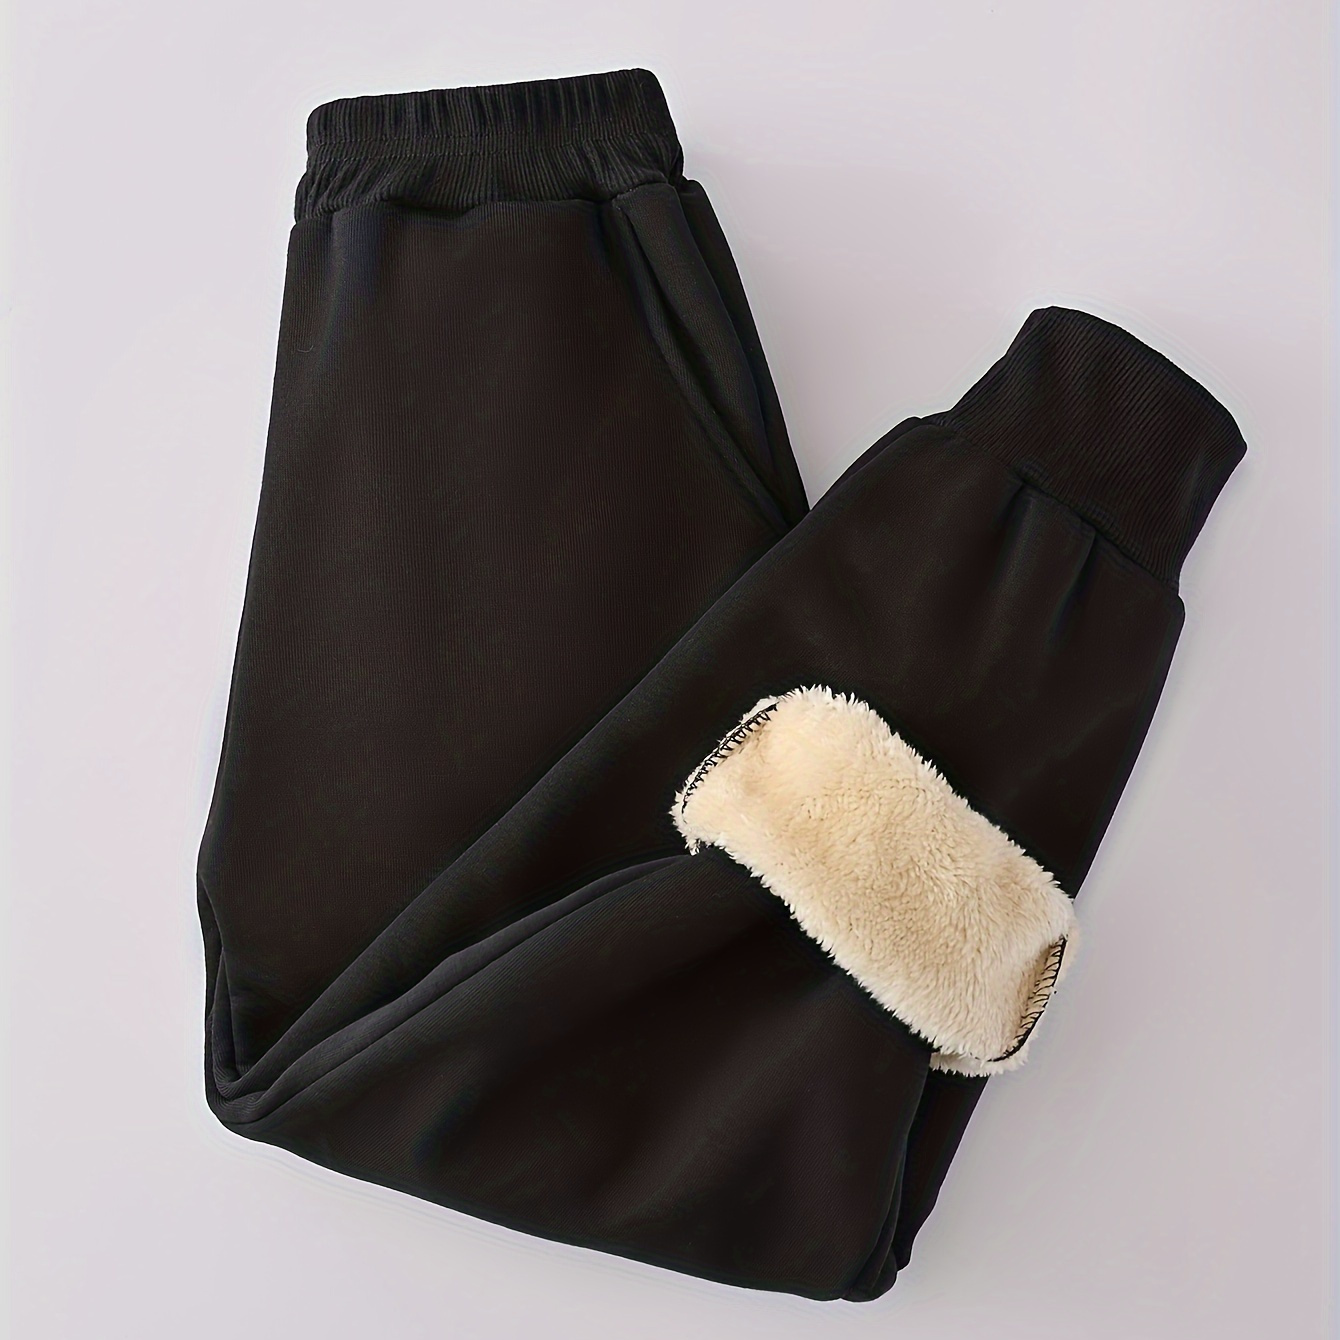 

Girls Solid Winter Trousers With Plush Fleece Lined, Versatile & Warm For Sports Outwear, Kids Bottoms